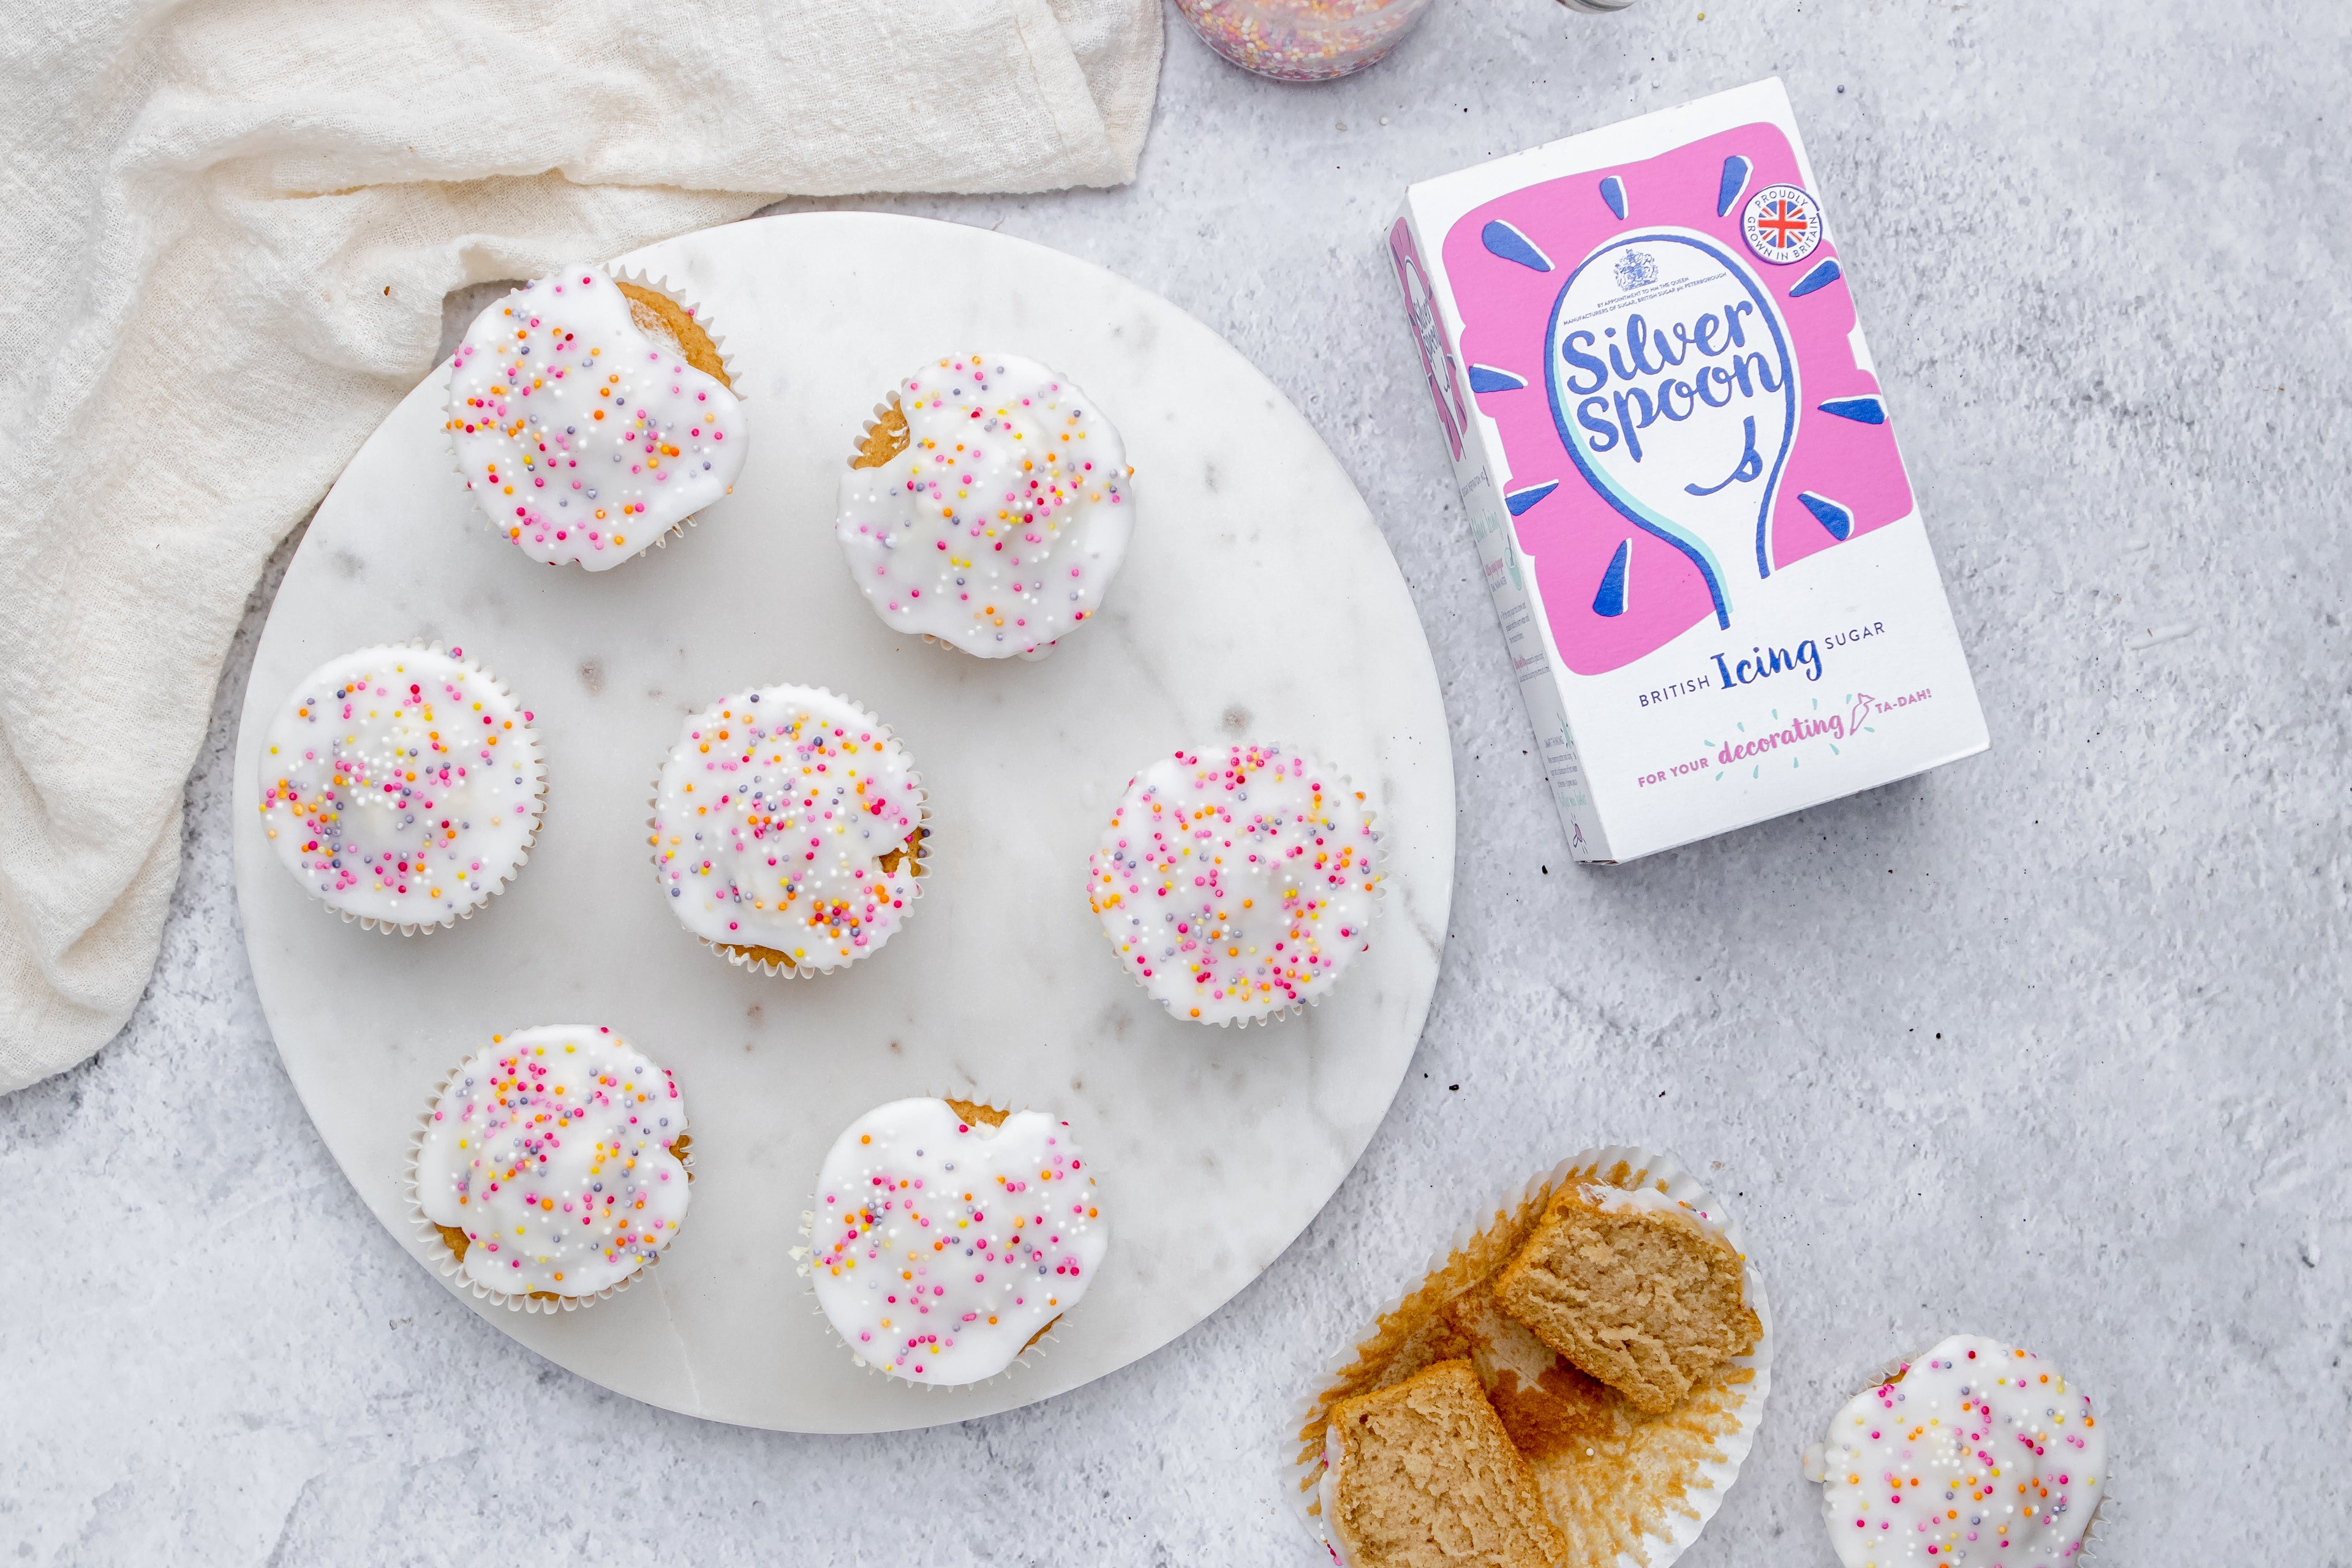 Simple Fairy Cakes on a plate next to a box of Silver Spoon Icing Sugar, and a sliced cupcake in a cupcake case